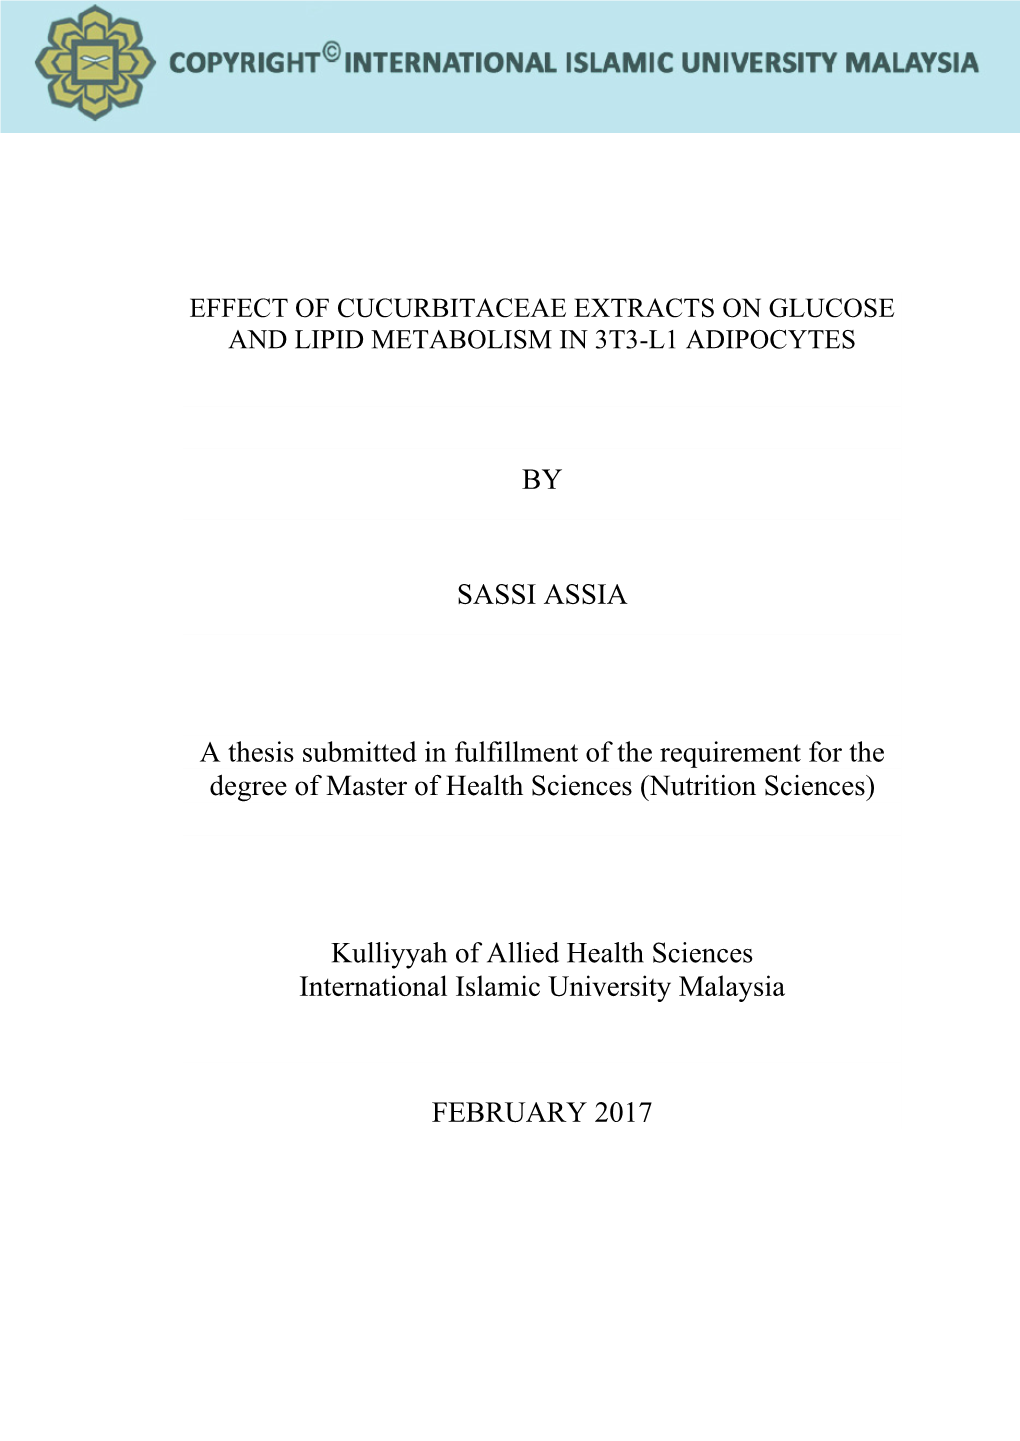 BY SASSI ASSIA a Thesis Submitted in Fulfillment of The